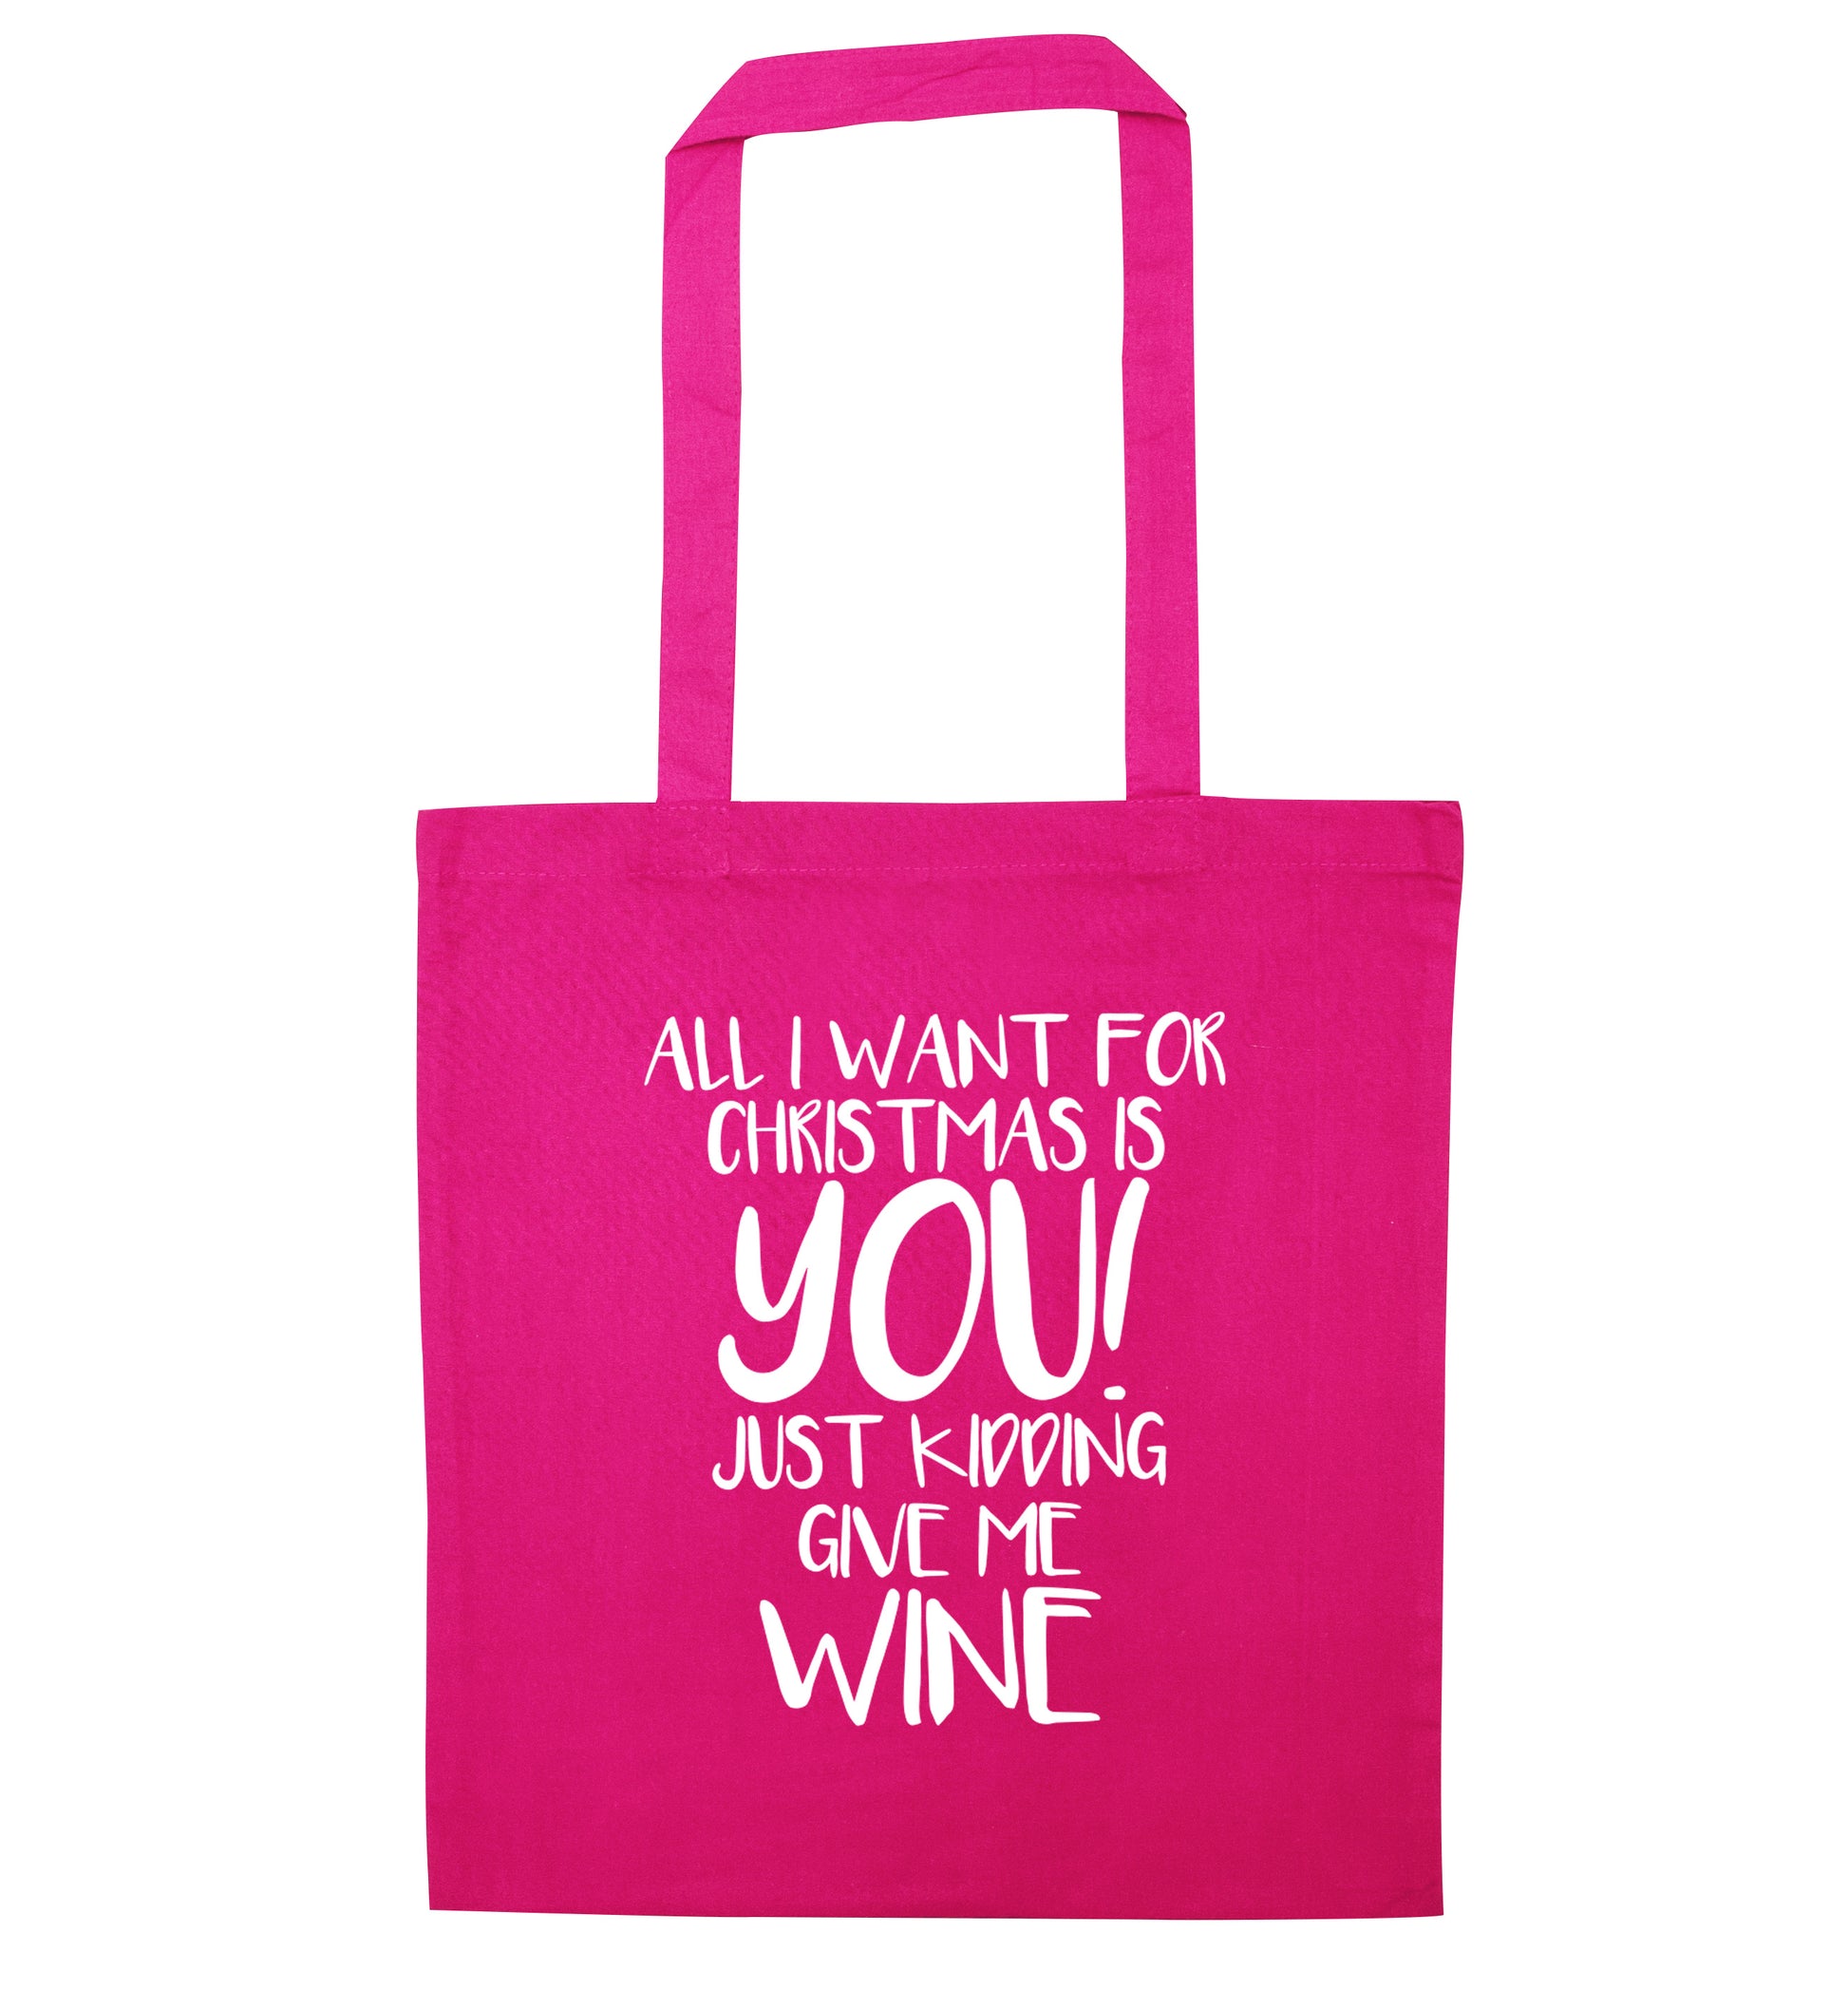 All I want for christmas is you just kidding give me the wine pink tote bag